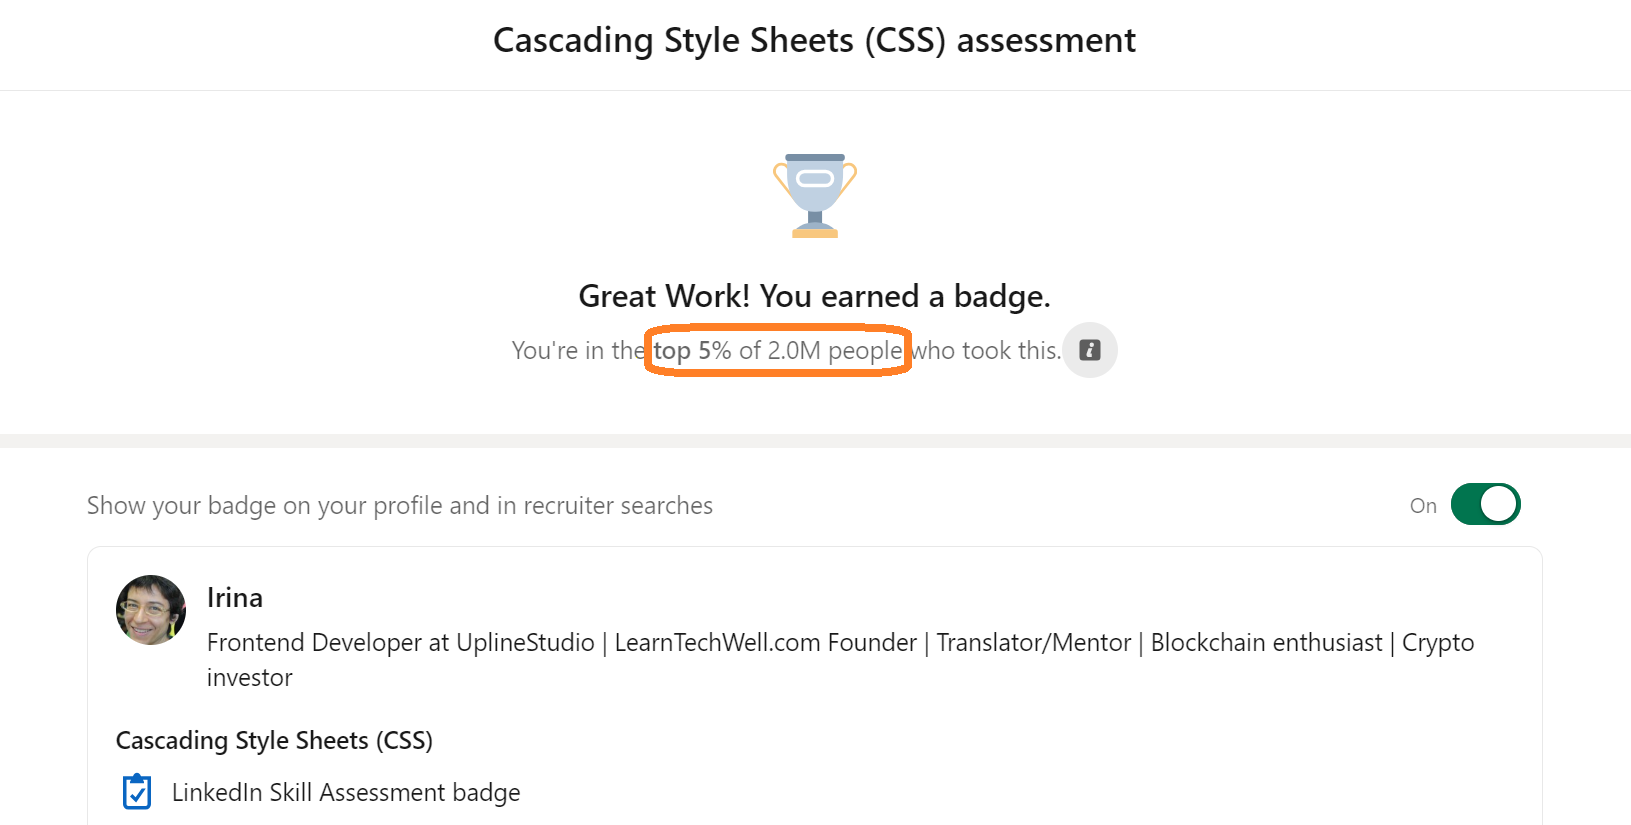 Ranked in the top 5% on LinkedIn CSS Assessment